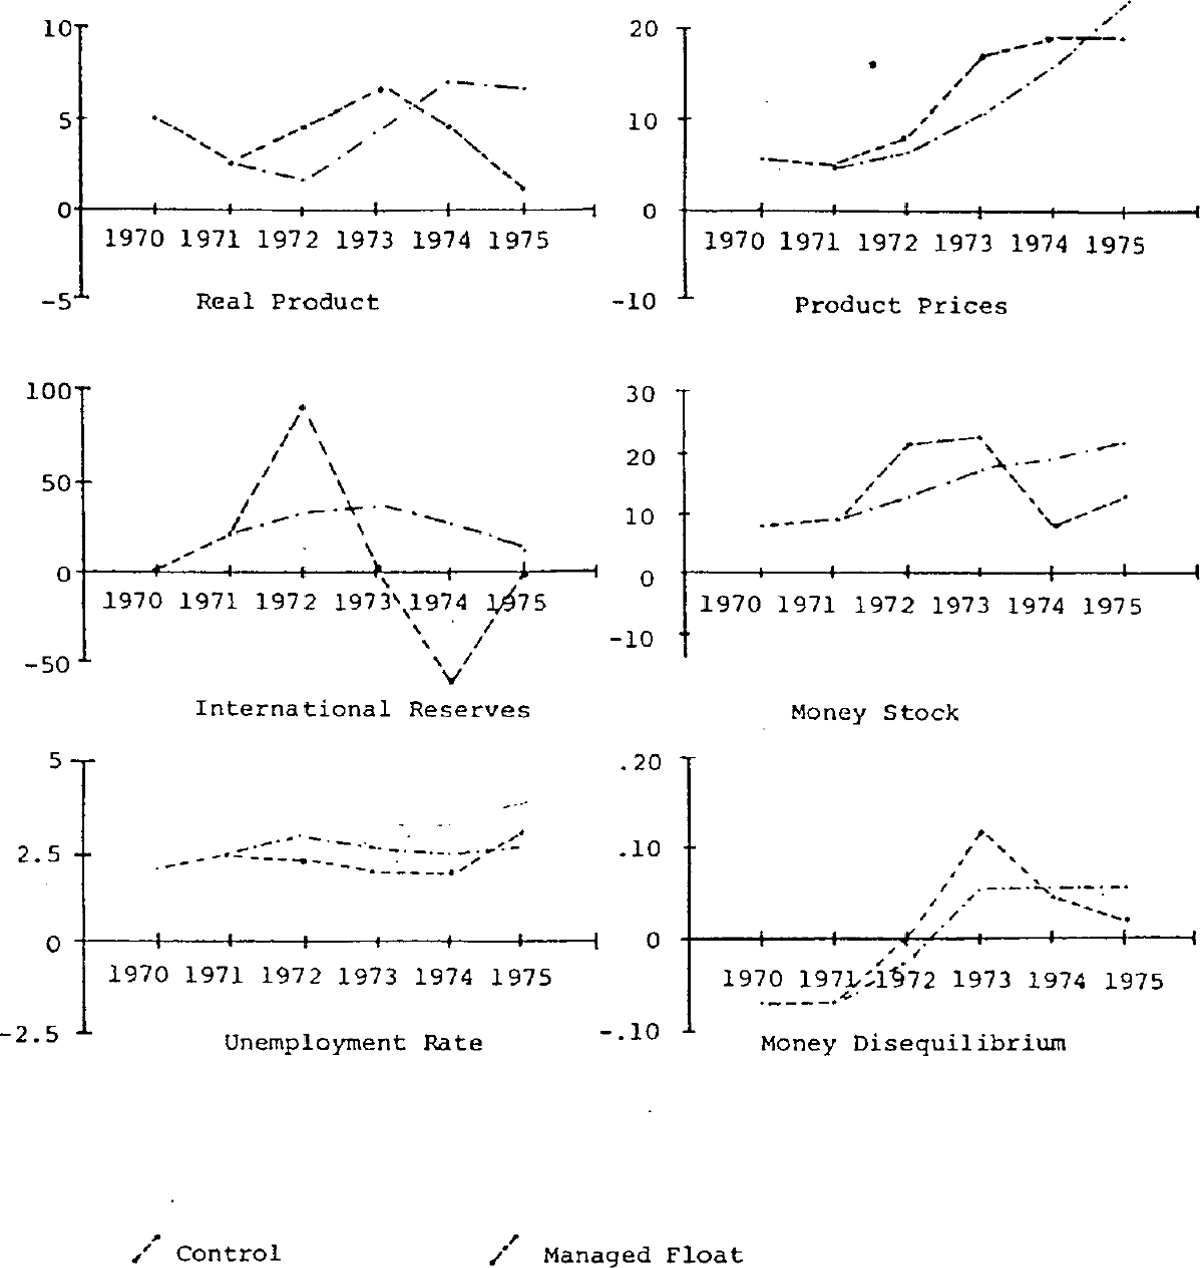 Figure 3: Control Solution and Managed Float: Growth Rates of Key Variables, Unemployment Rate and a Measure of Money Disequilibrium